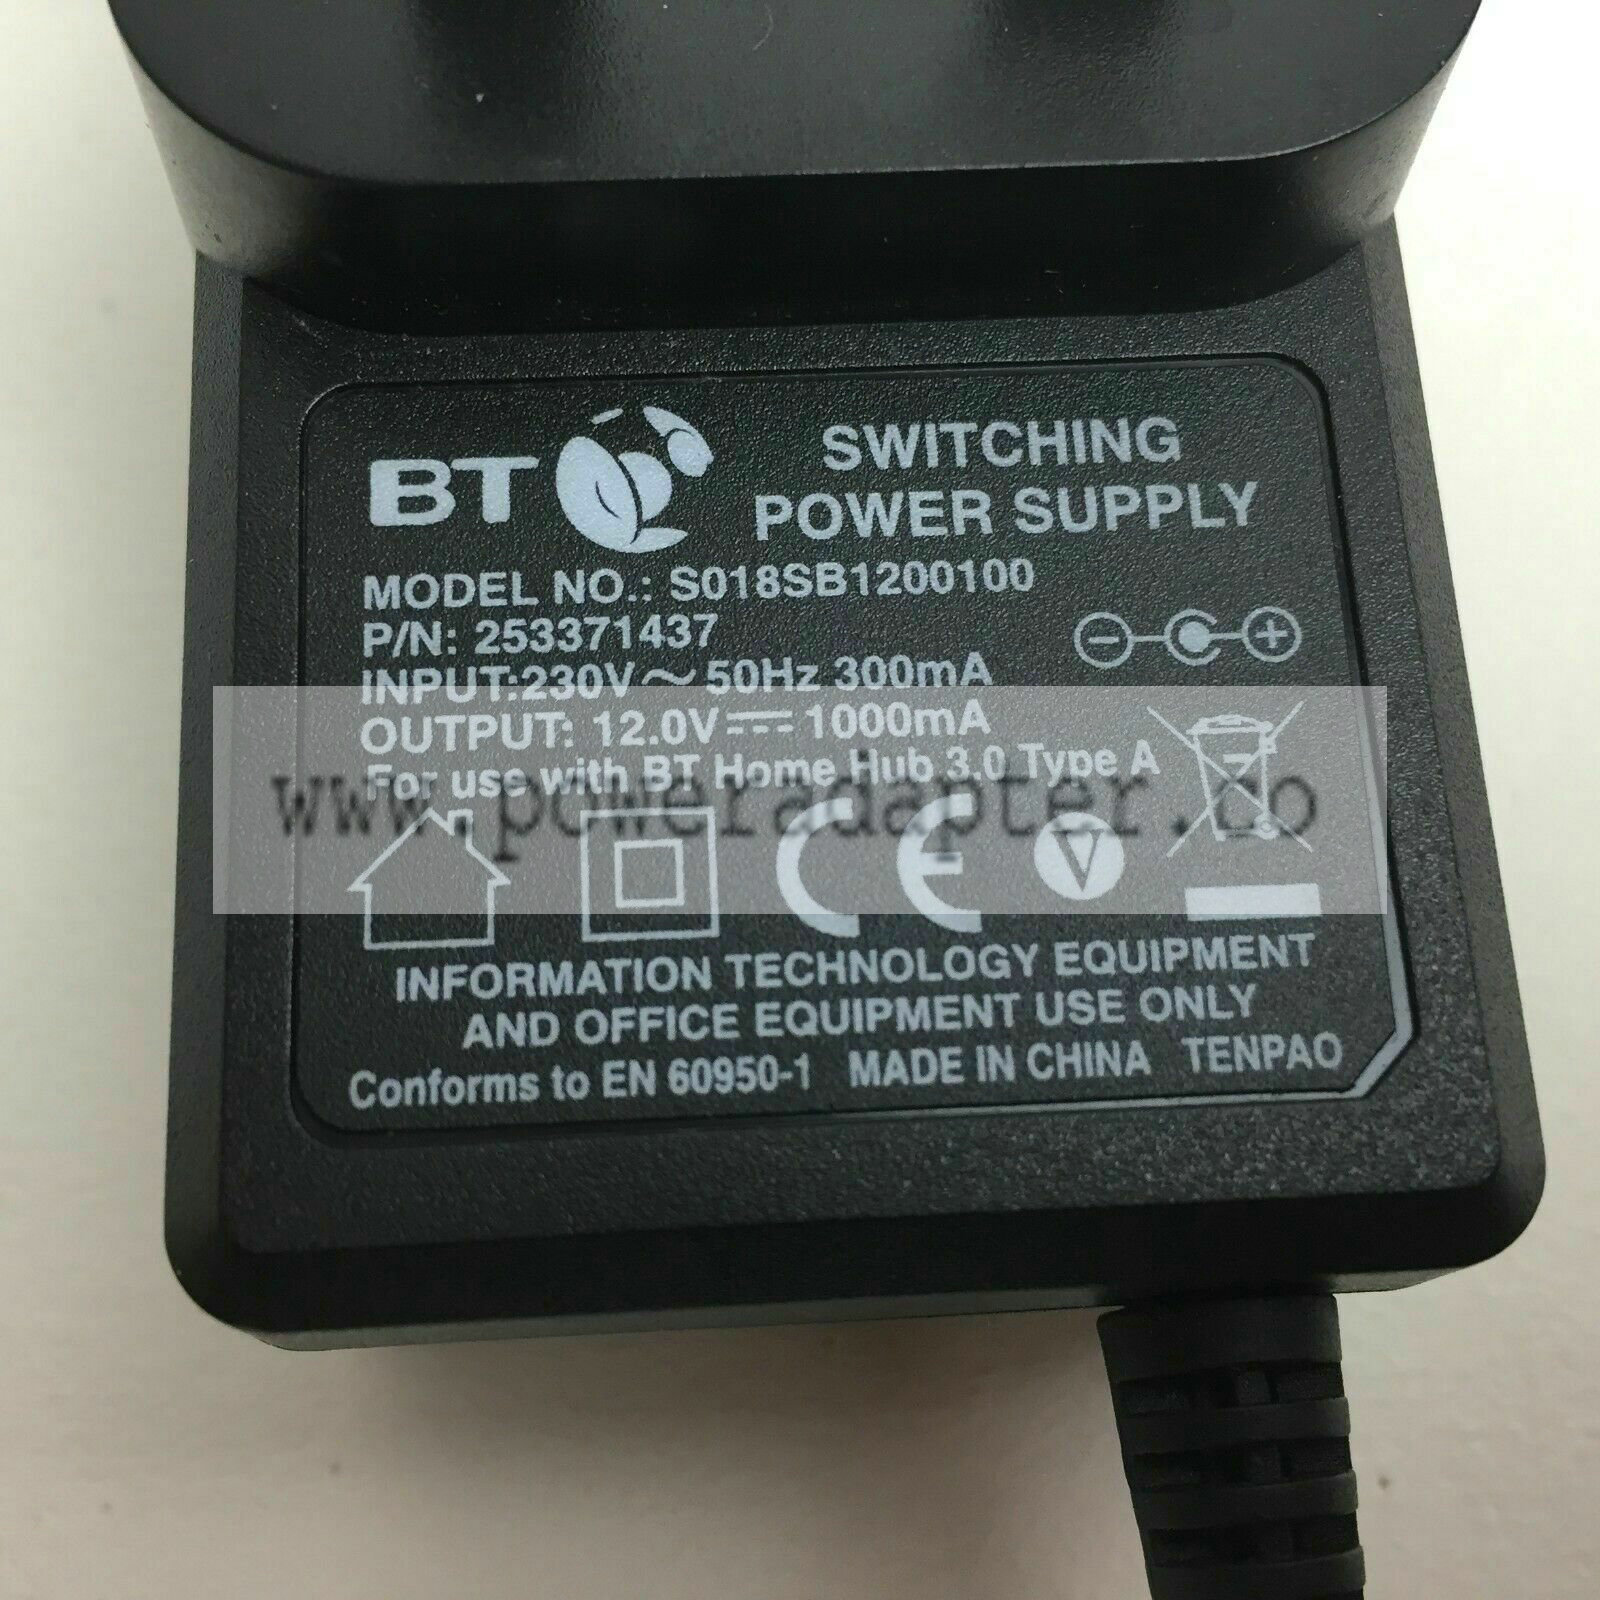 BT Switching Power Supply - Unit AC Adaptor For BT Home Hub 3.0 Type A (Item 1) Brand: BT MPN: S012NB1200100 EAN: - Click Image to Close